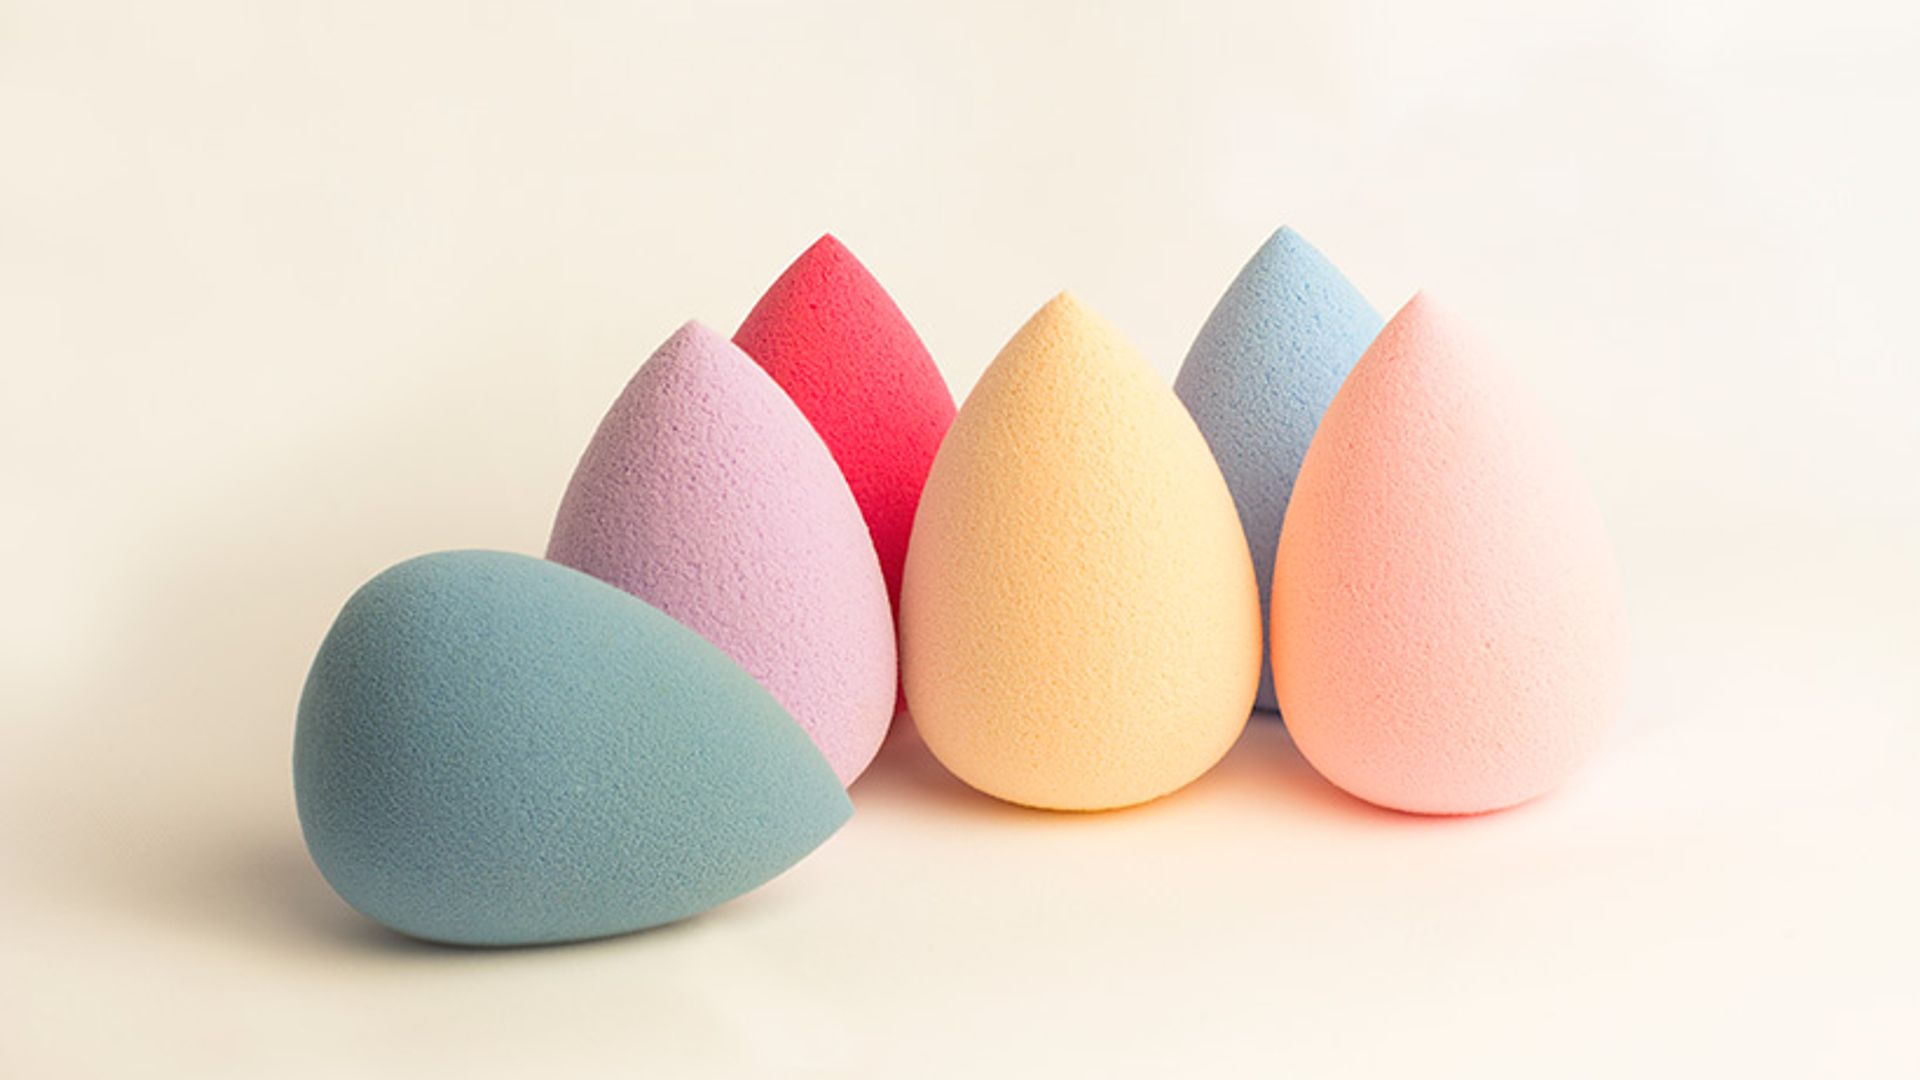 Do you use your Beauty Blender the right way? We asked a pro makeup artist